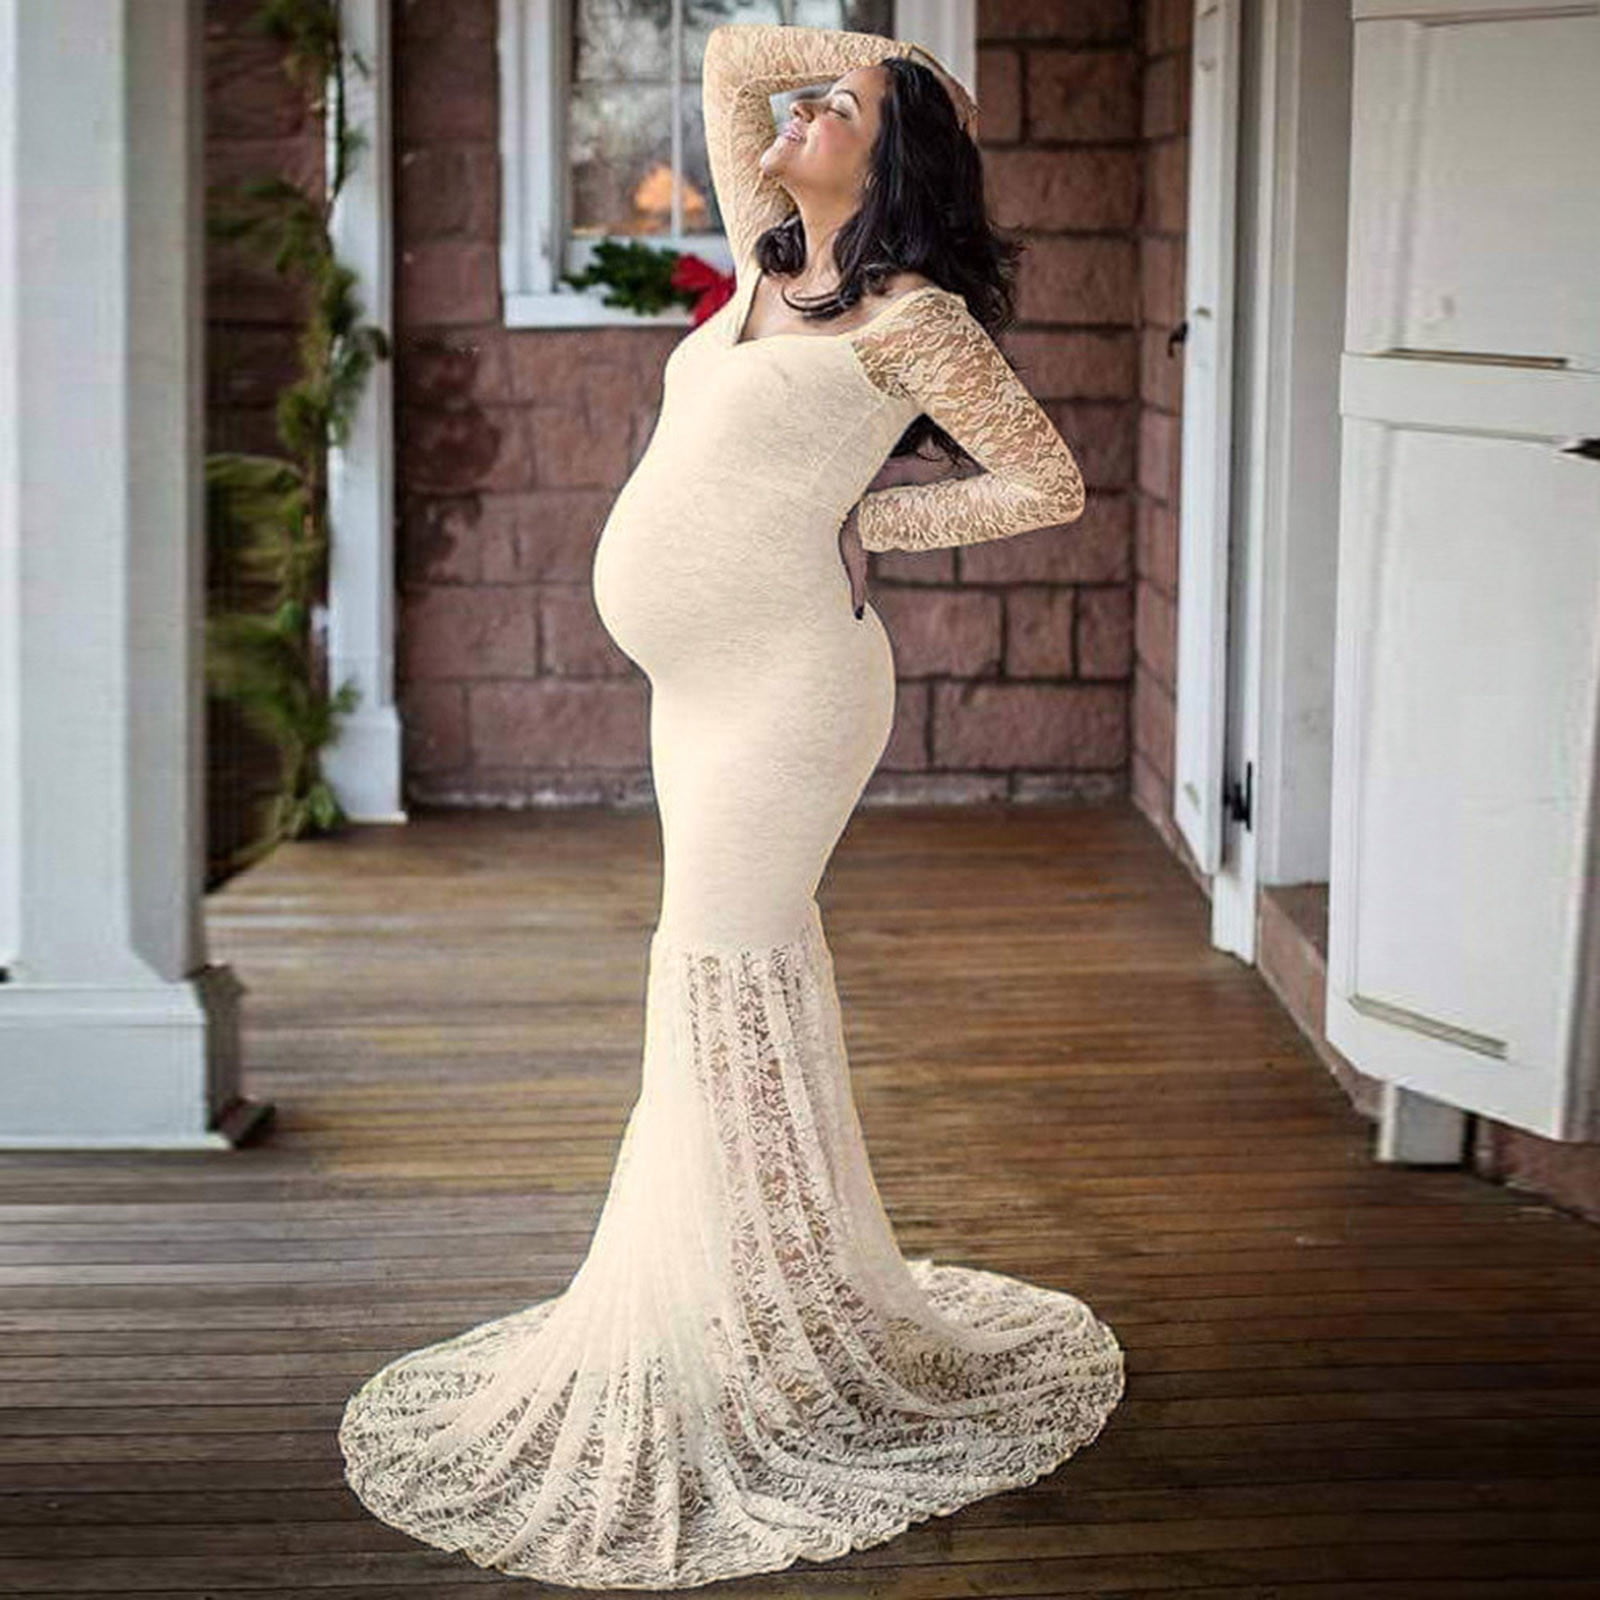 Luxury Purple Maternity Maternity Evening Gowns With Ruffled Design,  Crystal Embellishments, And Bathrobe Perfect For Baby Showers, Poshoots,  Nightwear, Or Pregnancy Style 253Z From Cucu, $94.84 | DHgate.Com